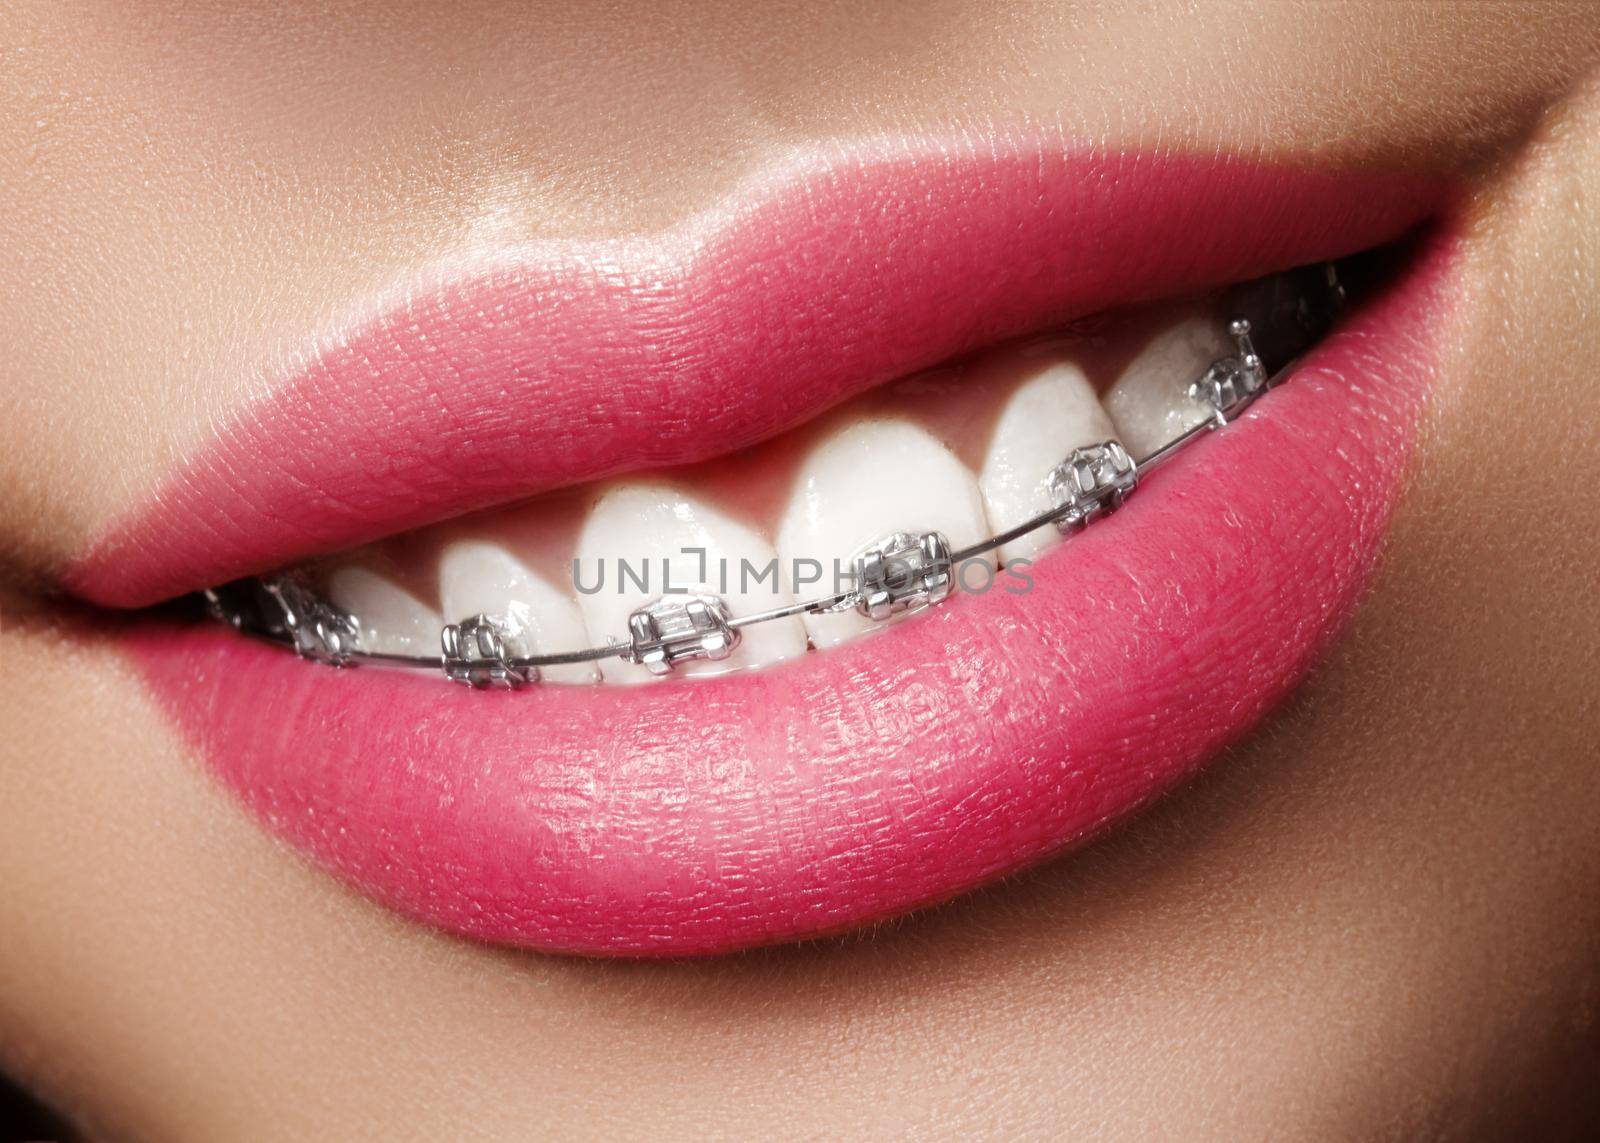 Beautiful Macro Close-up of White Teeth with Braces. Dental Care Photo. Beauty Woman Smile with Ortodontic Accessories. Orthodontics Treatment. Closeup of Healthy Female Mouth